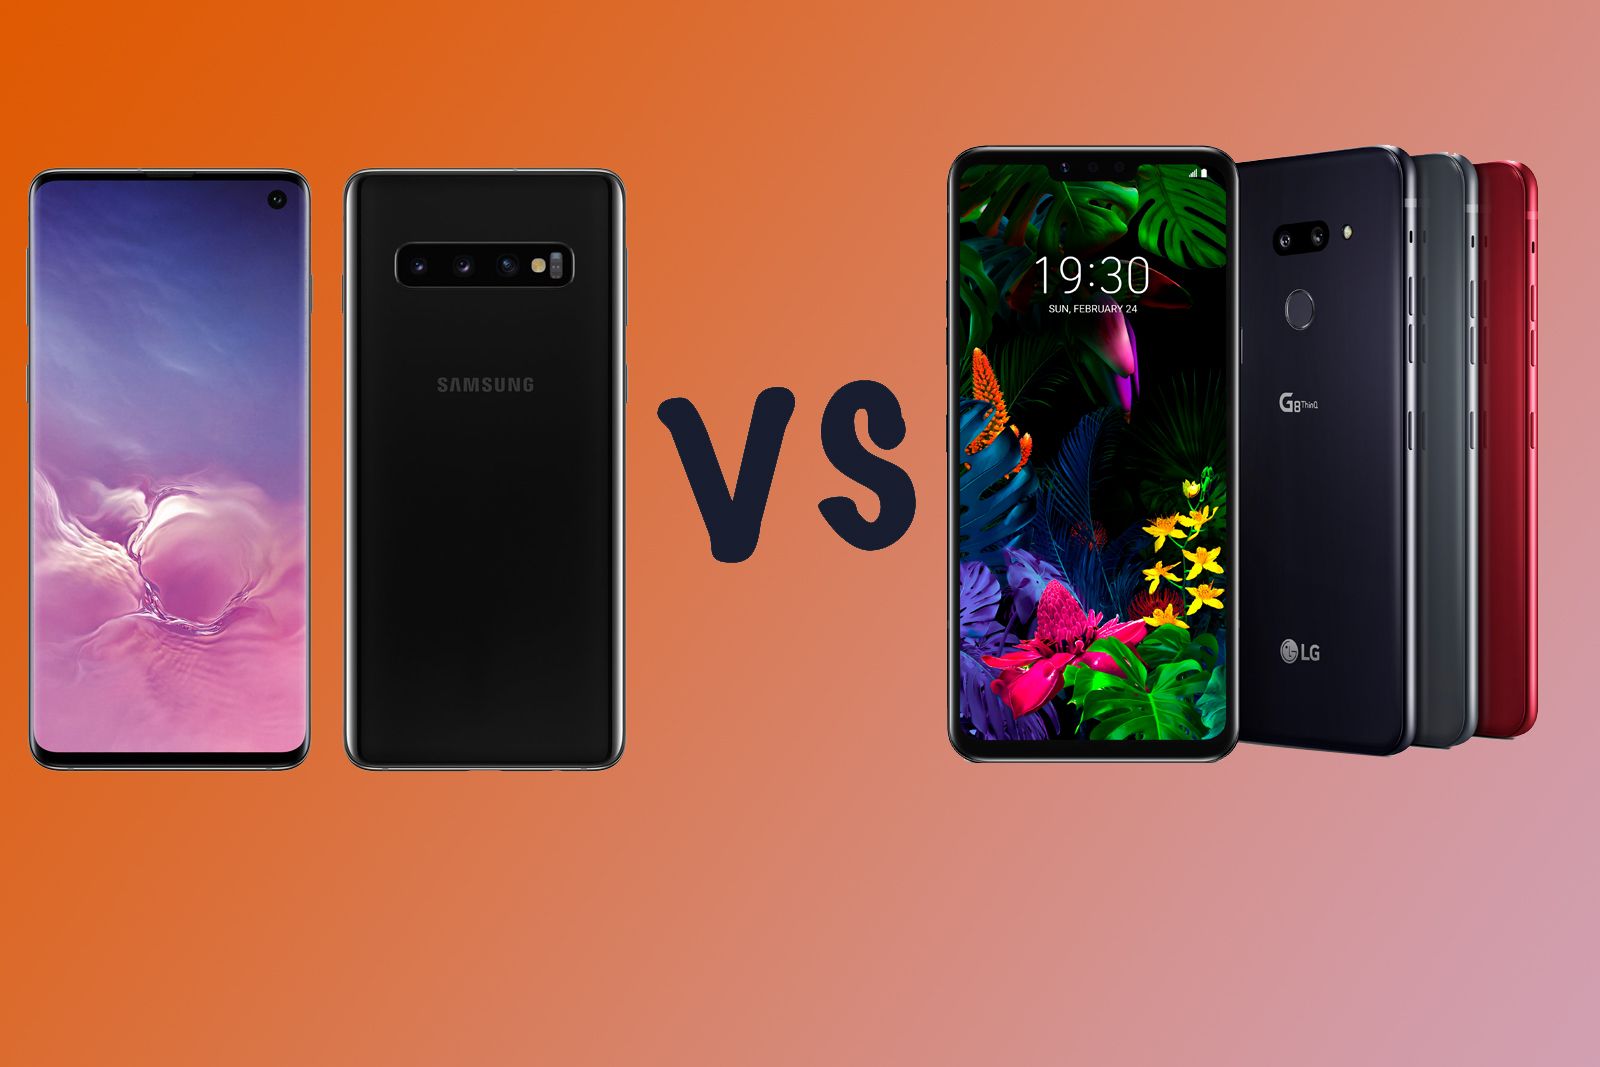 Samsung Galaxy S10 Vs Lg G8 Which Should You Buy image 1